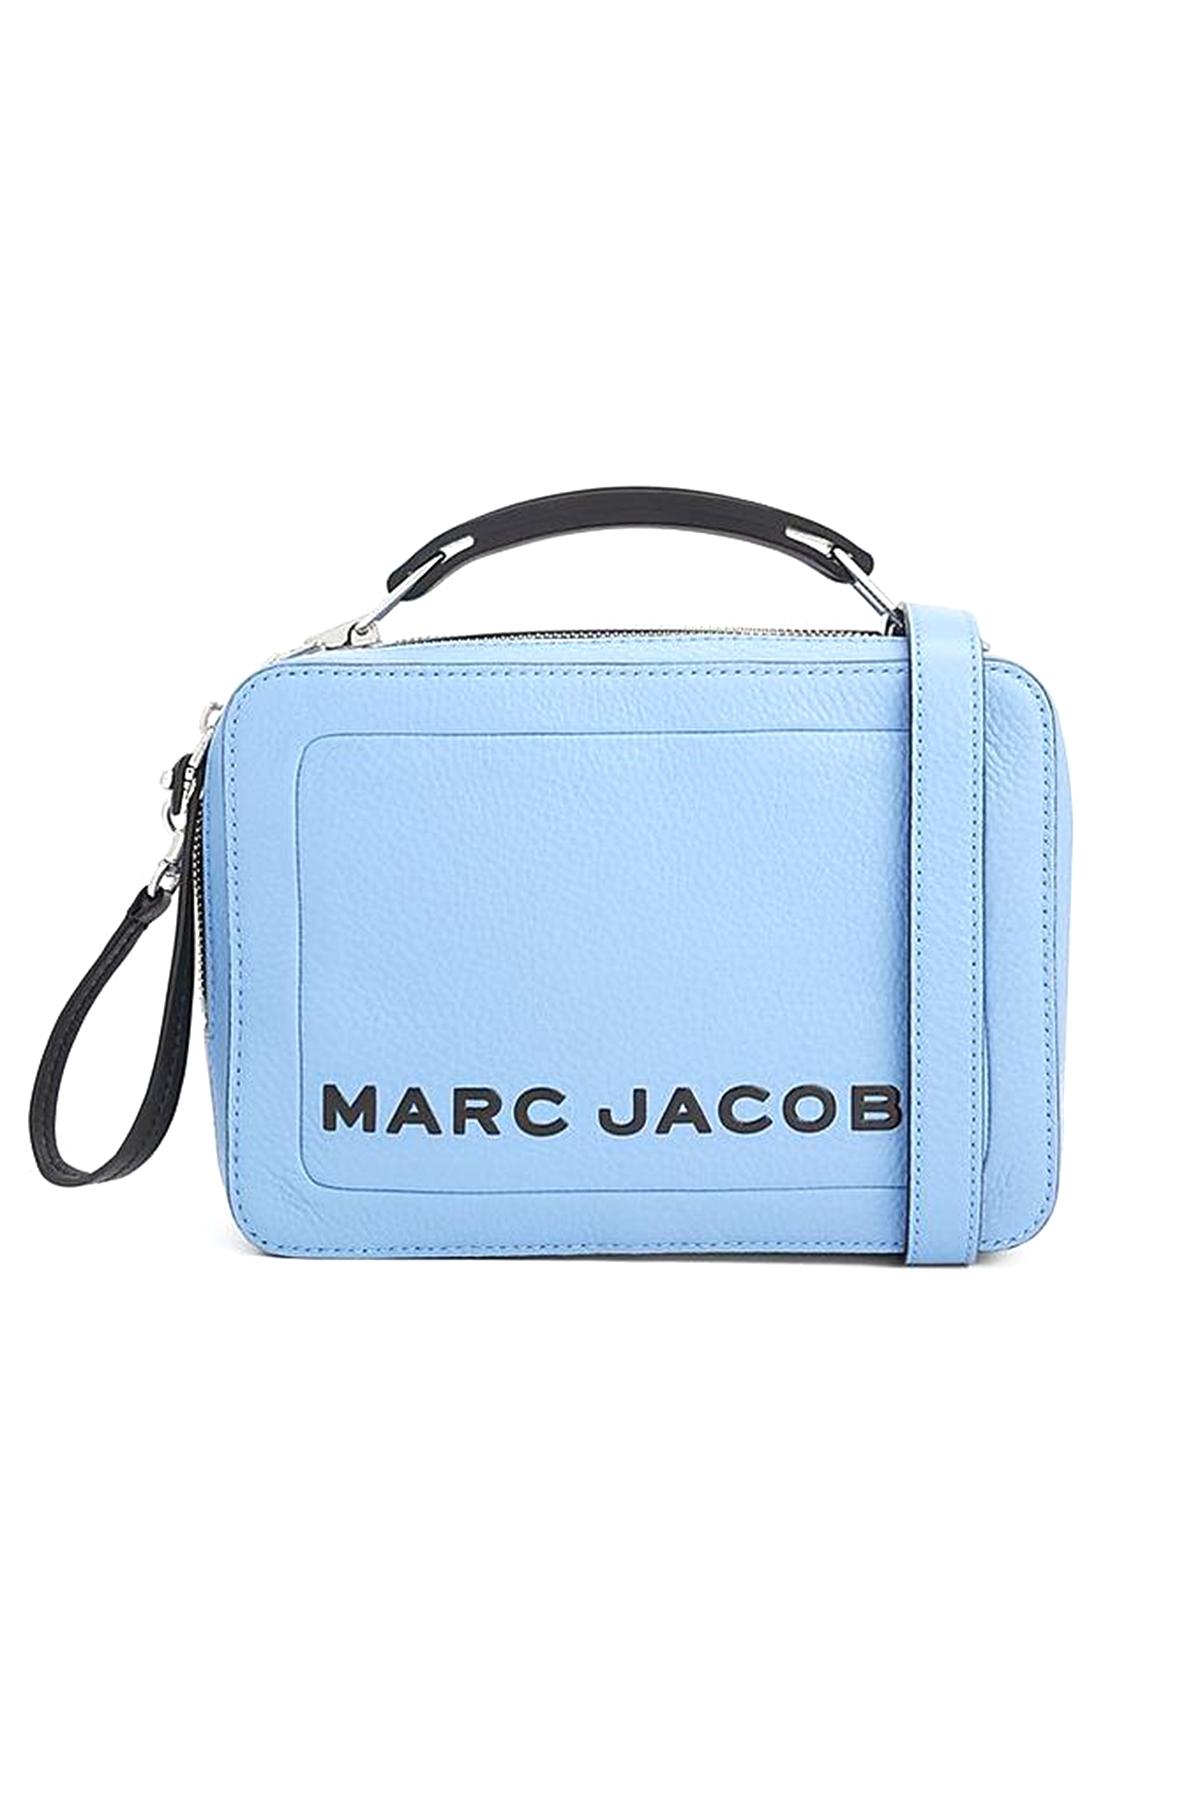 A NEW BAG IN TOWN // THE MARC JACOBS BOX BAG - Atlantic-Pacific